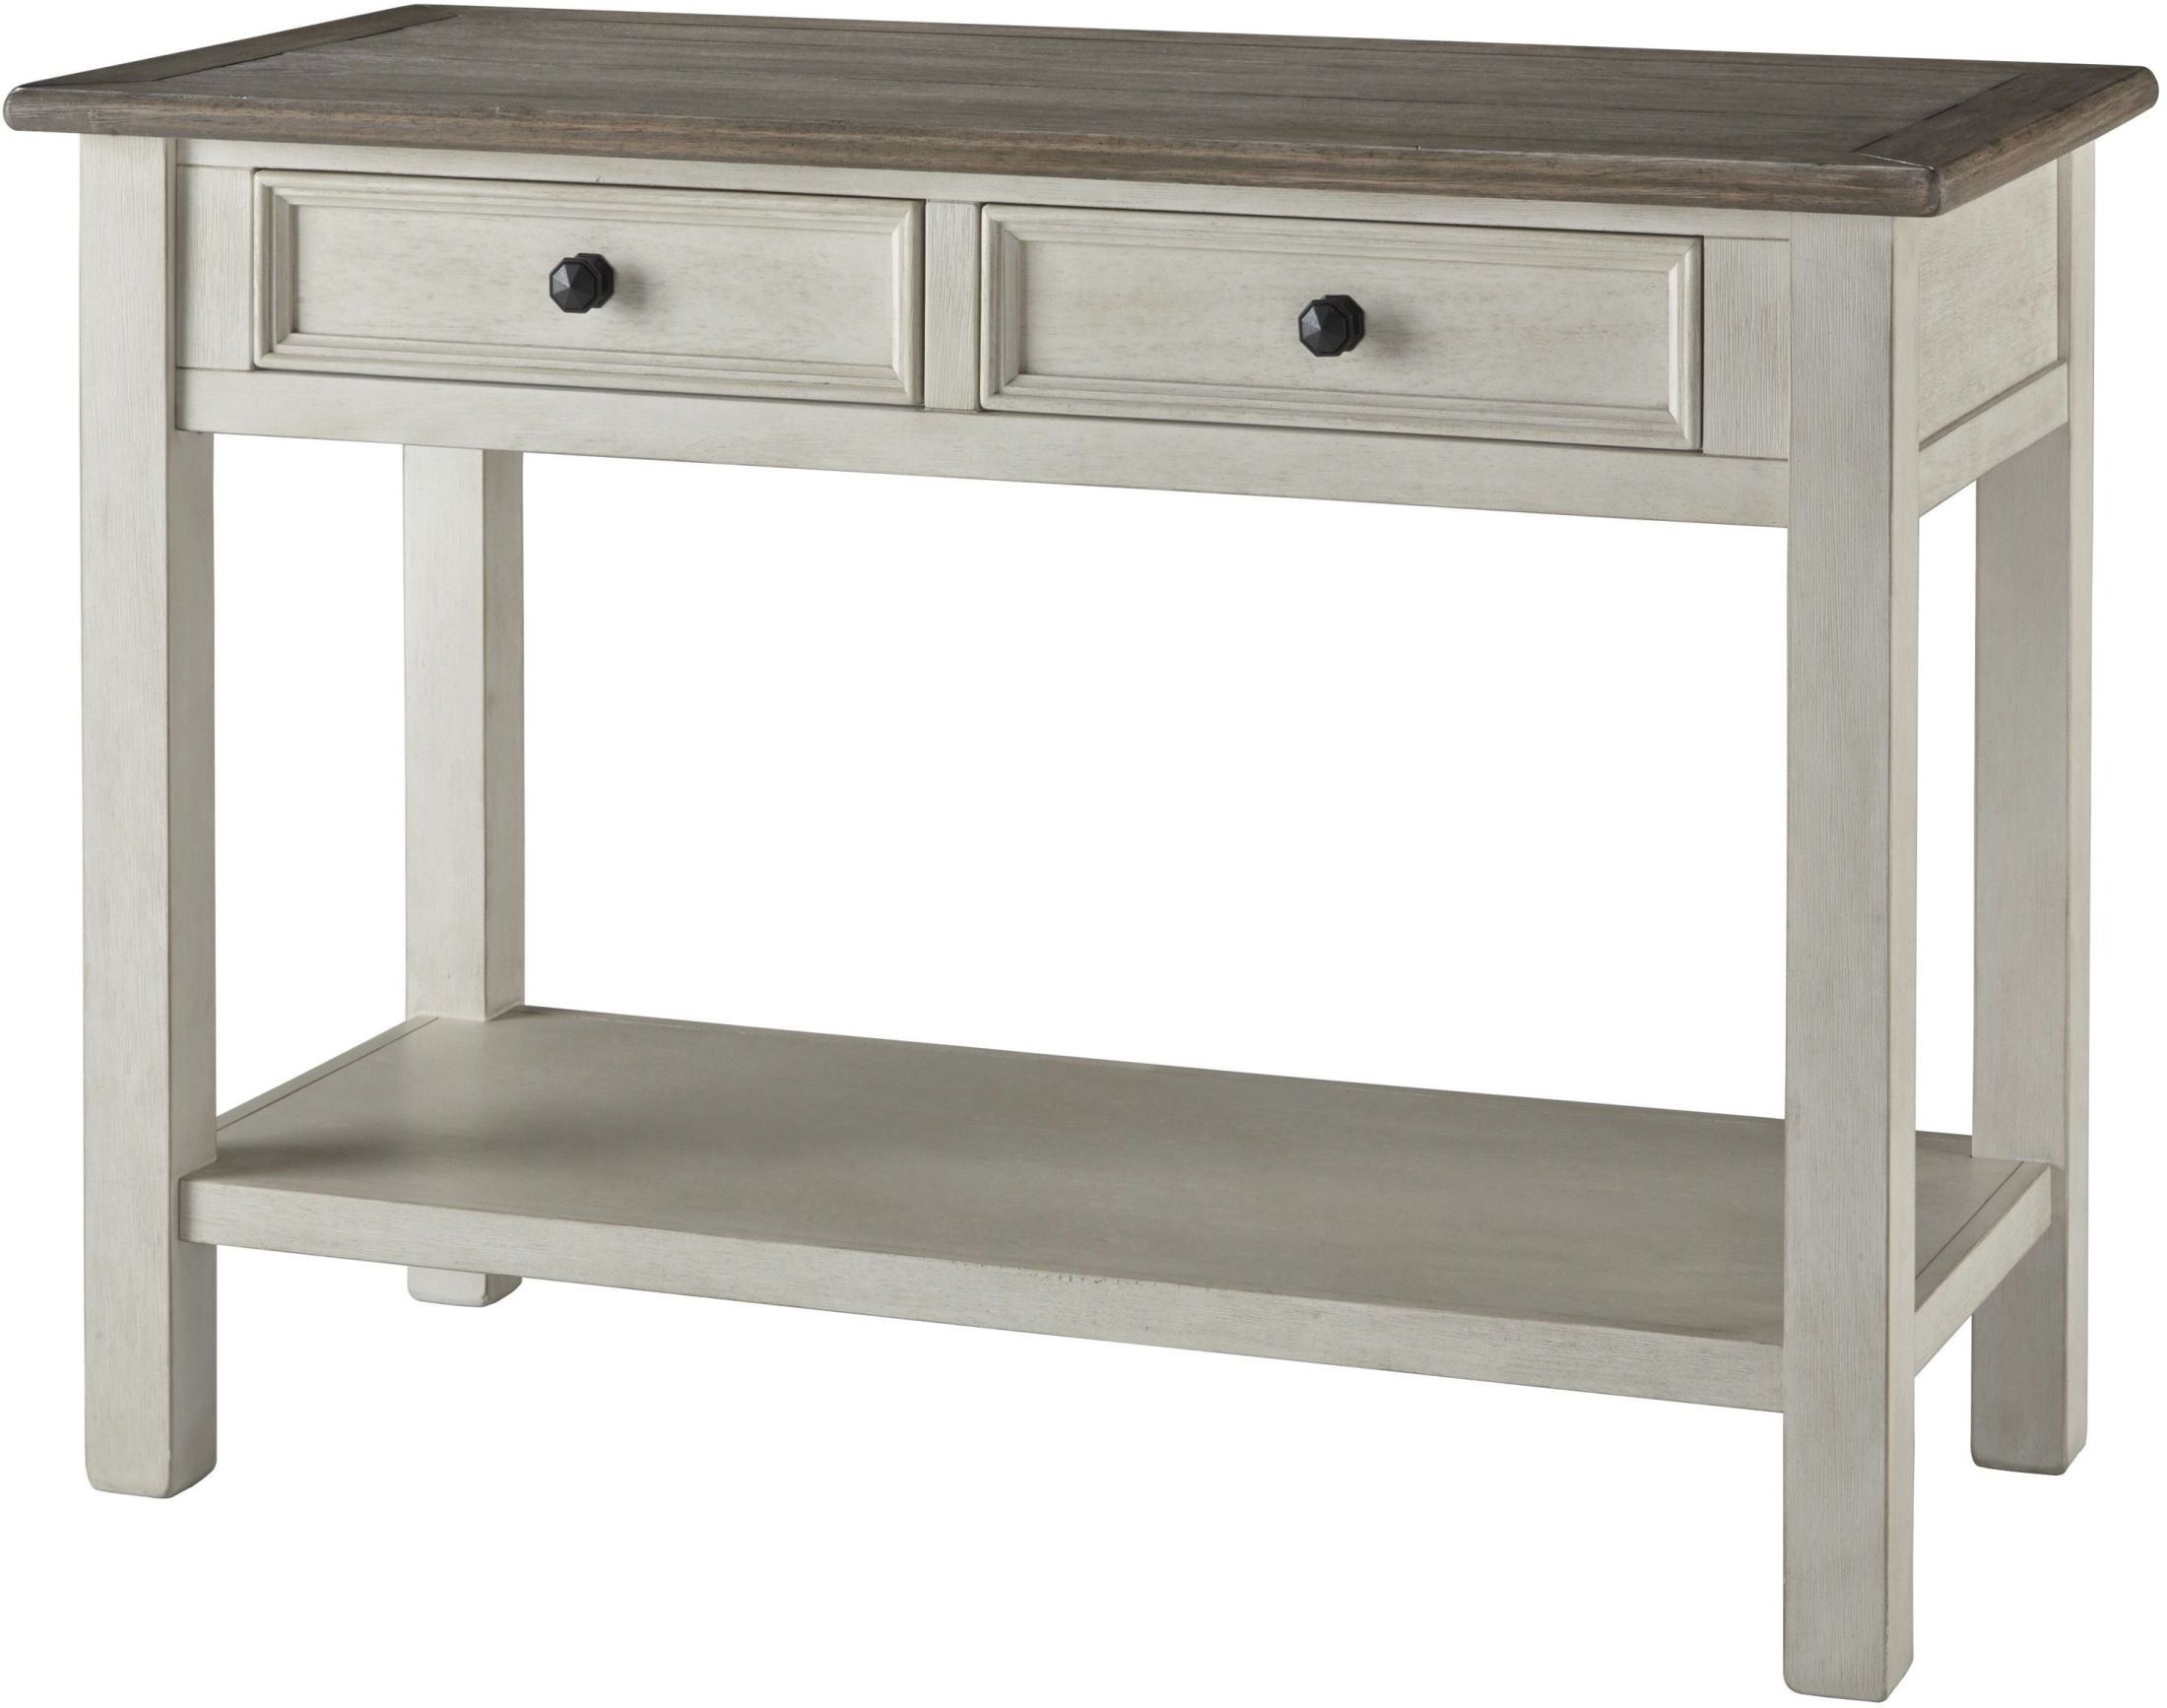 Trendy Gray Wood Veneer Console Tables In Bolanburg Antique White Weathered Gray Sofa Table From (View 5 of 10)